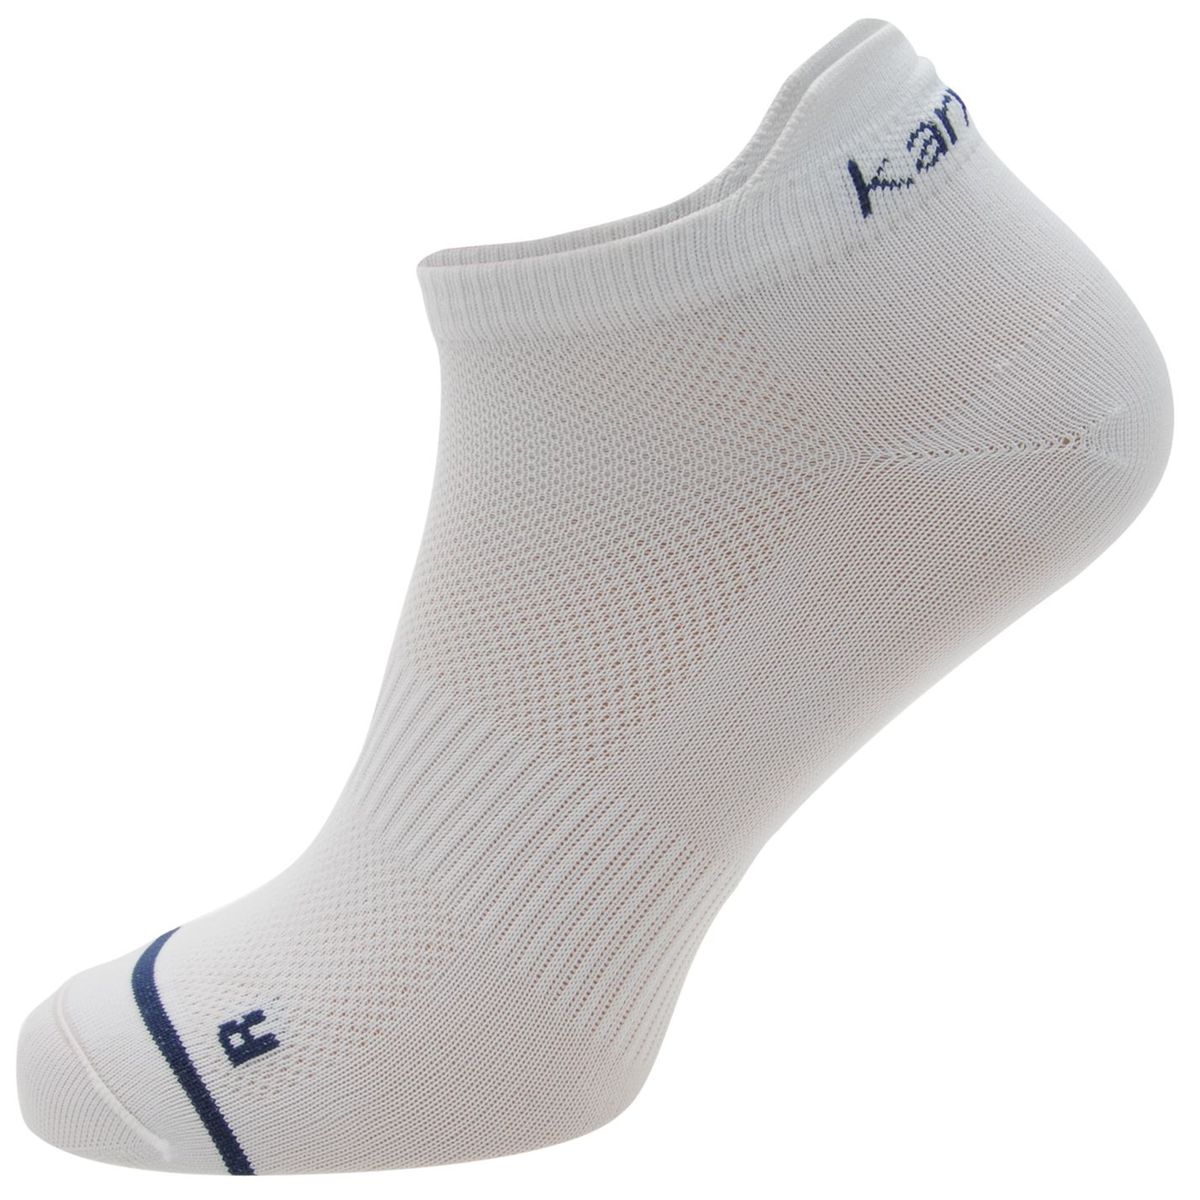 2 Pack Hommes Karrimor DRX tissu Running Support Chaussettes Taille 7-11 